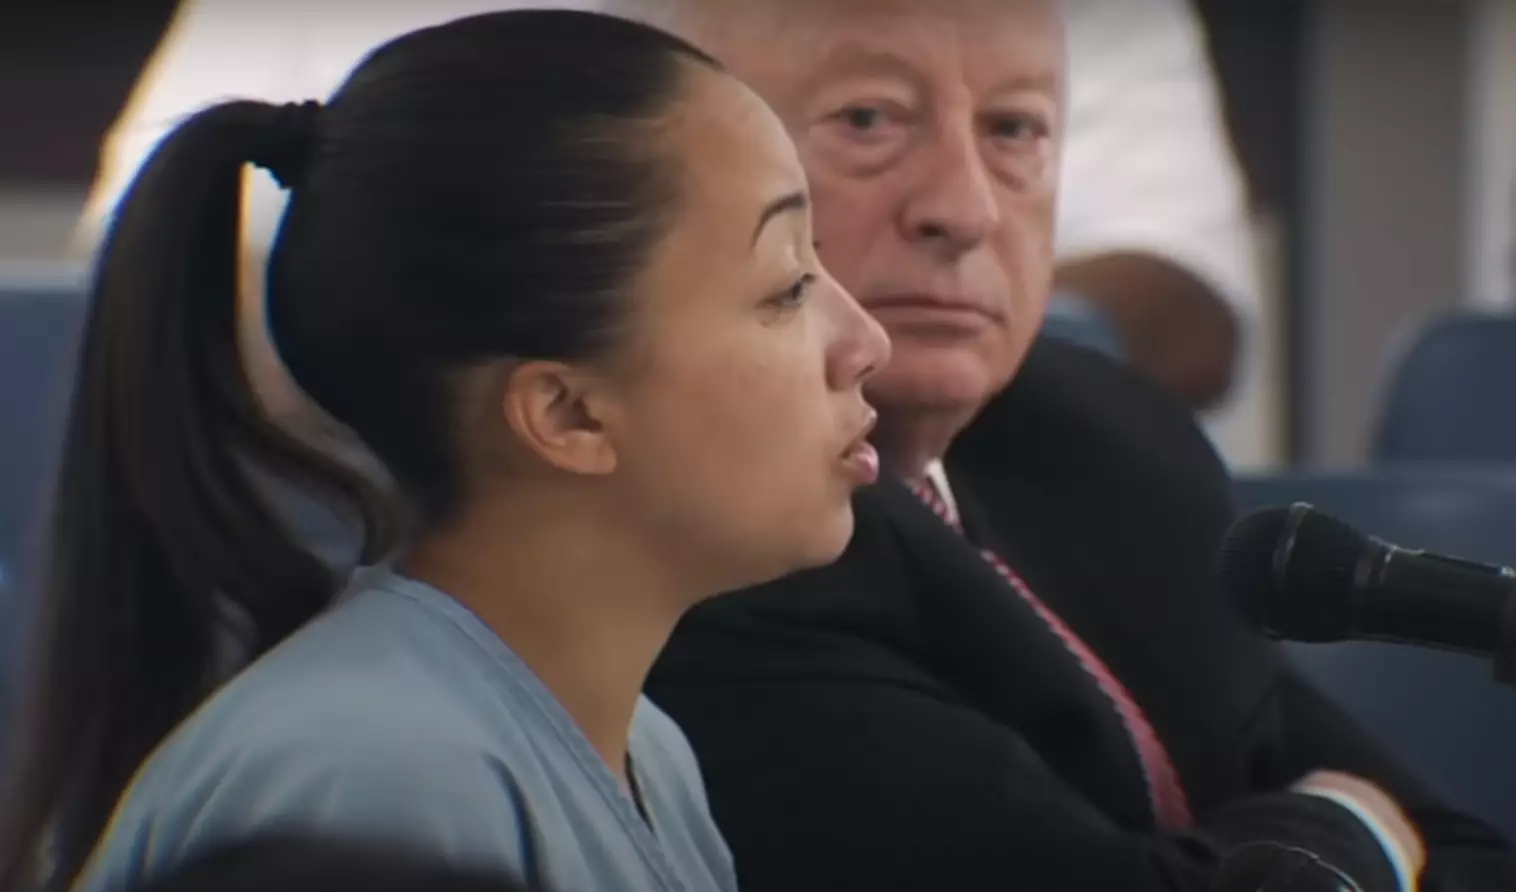 Cyntoia was released from prison when she was 31.